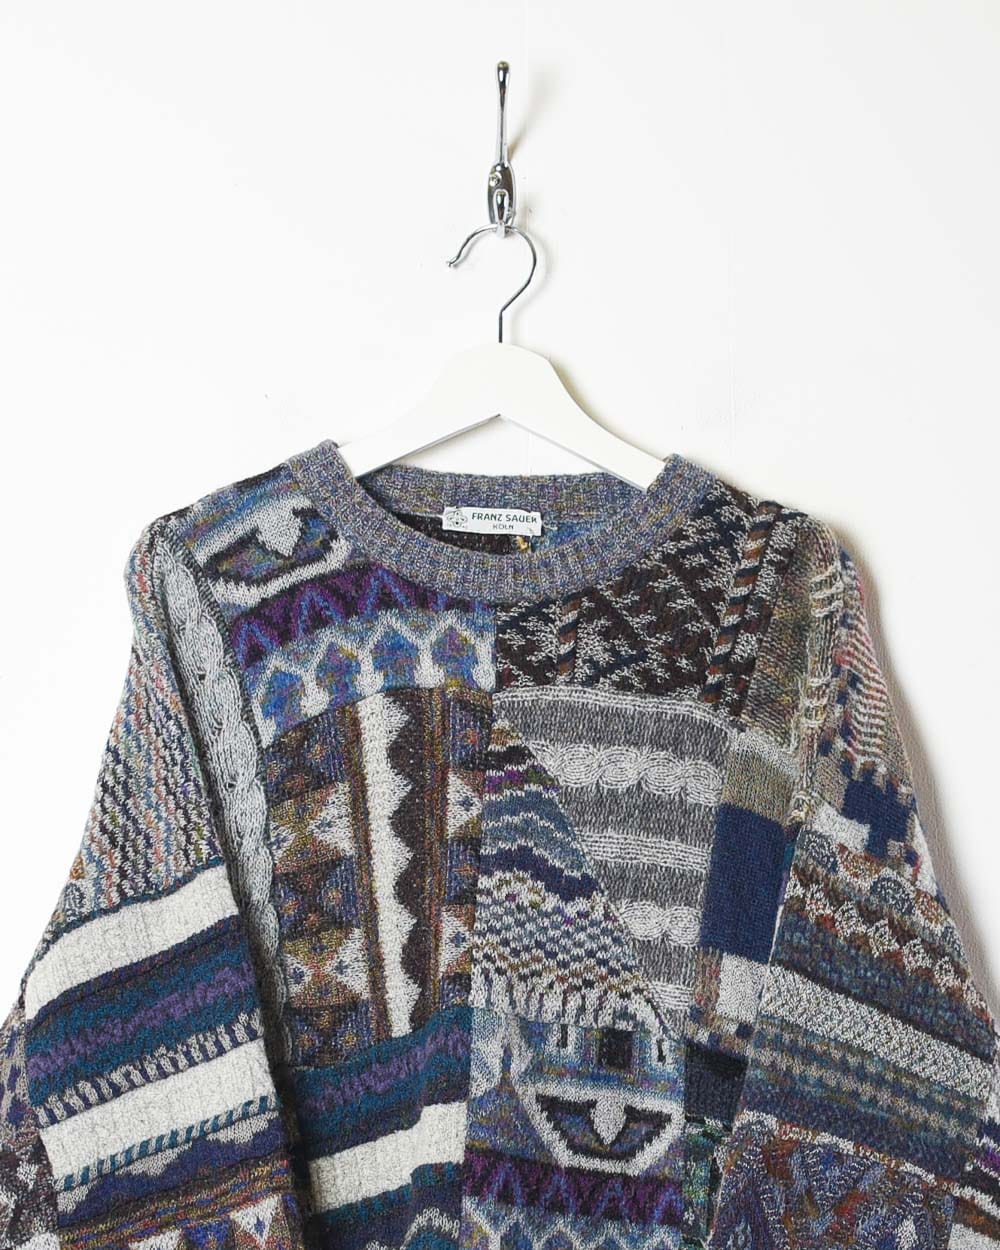 Multi Franz Sauer Patterned Knitted Sweatshirt - Large